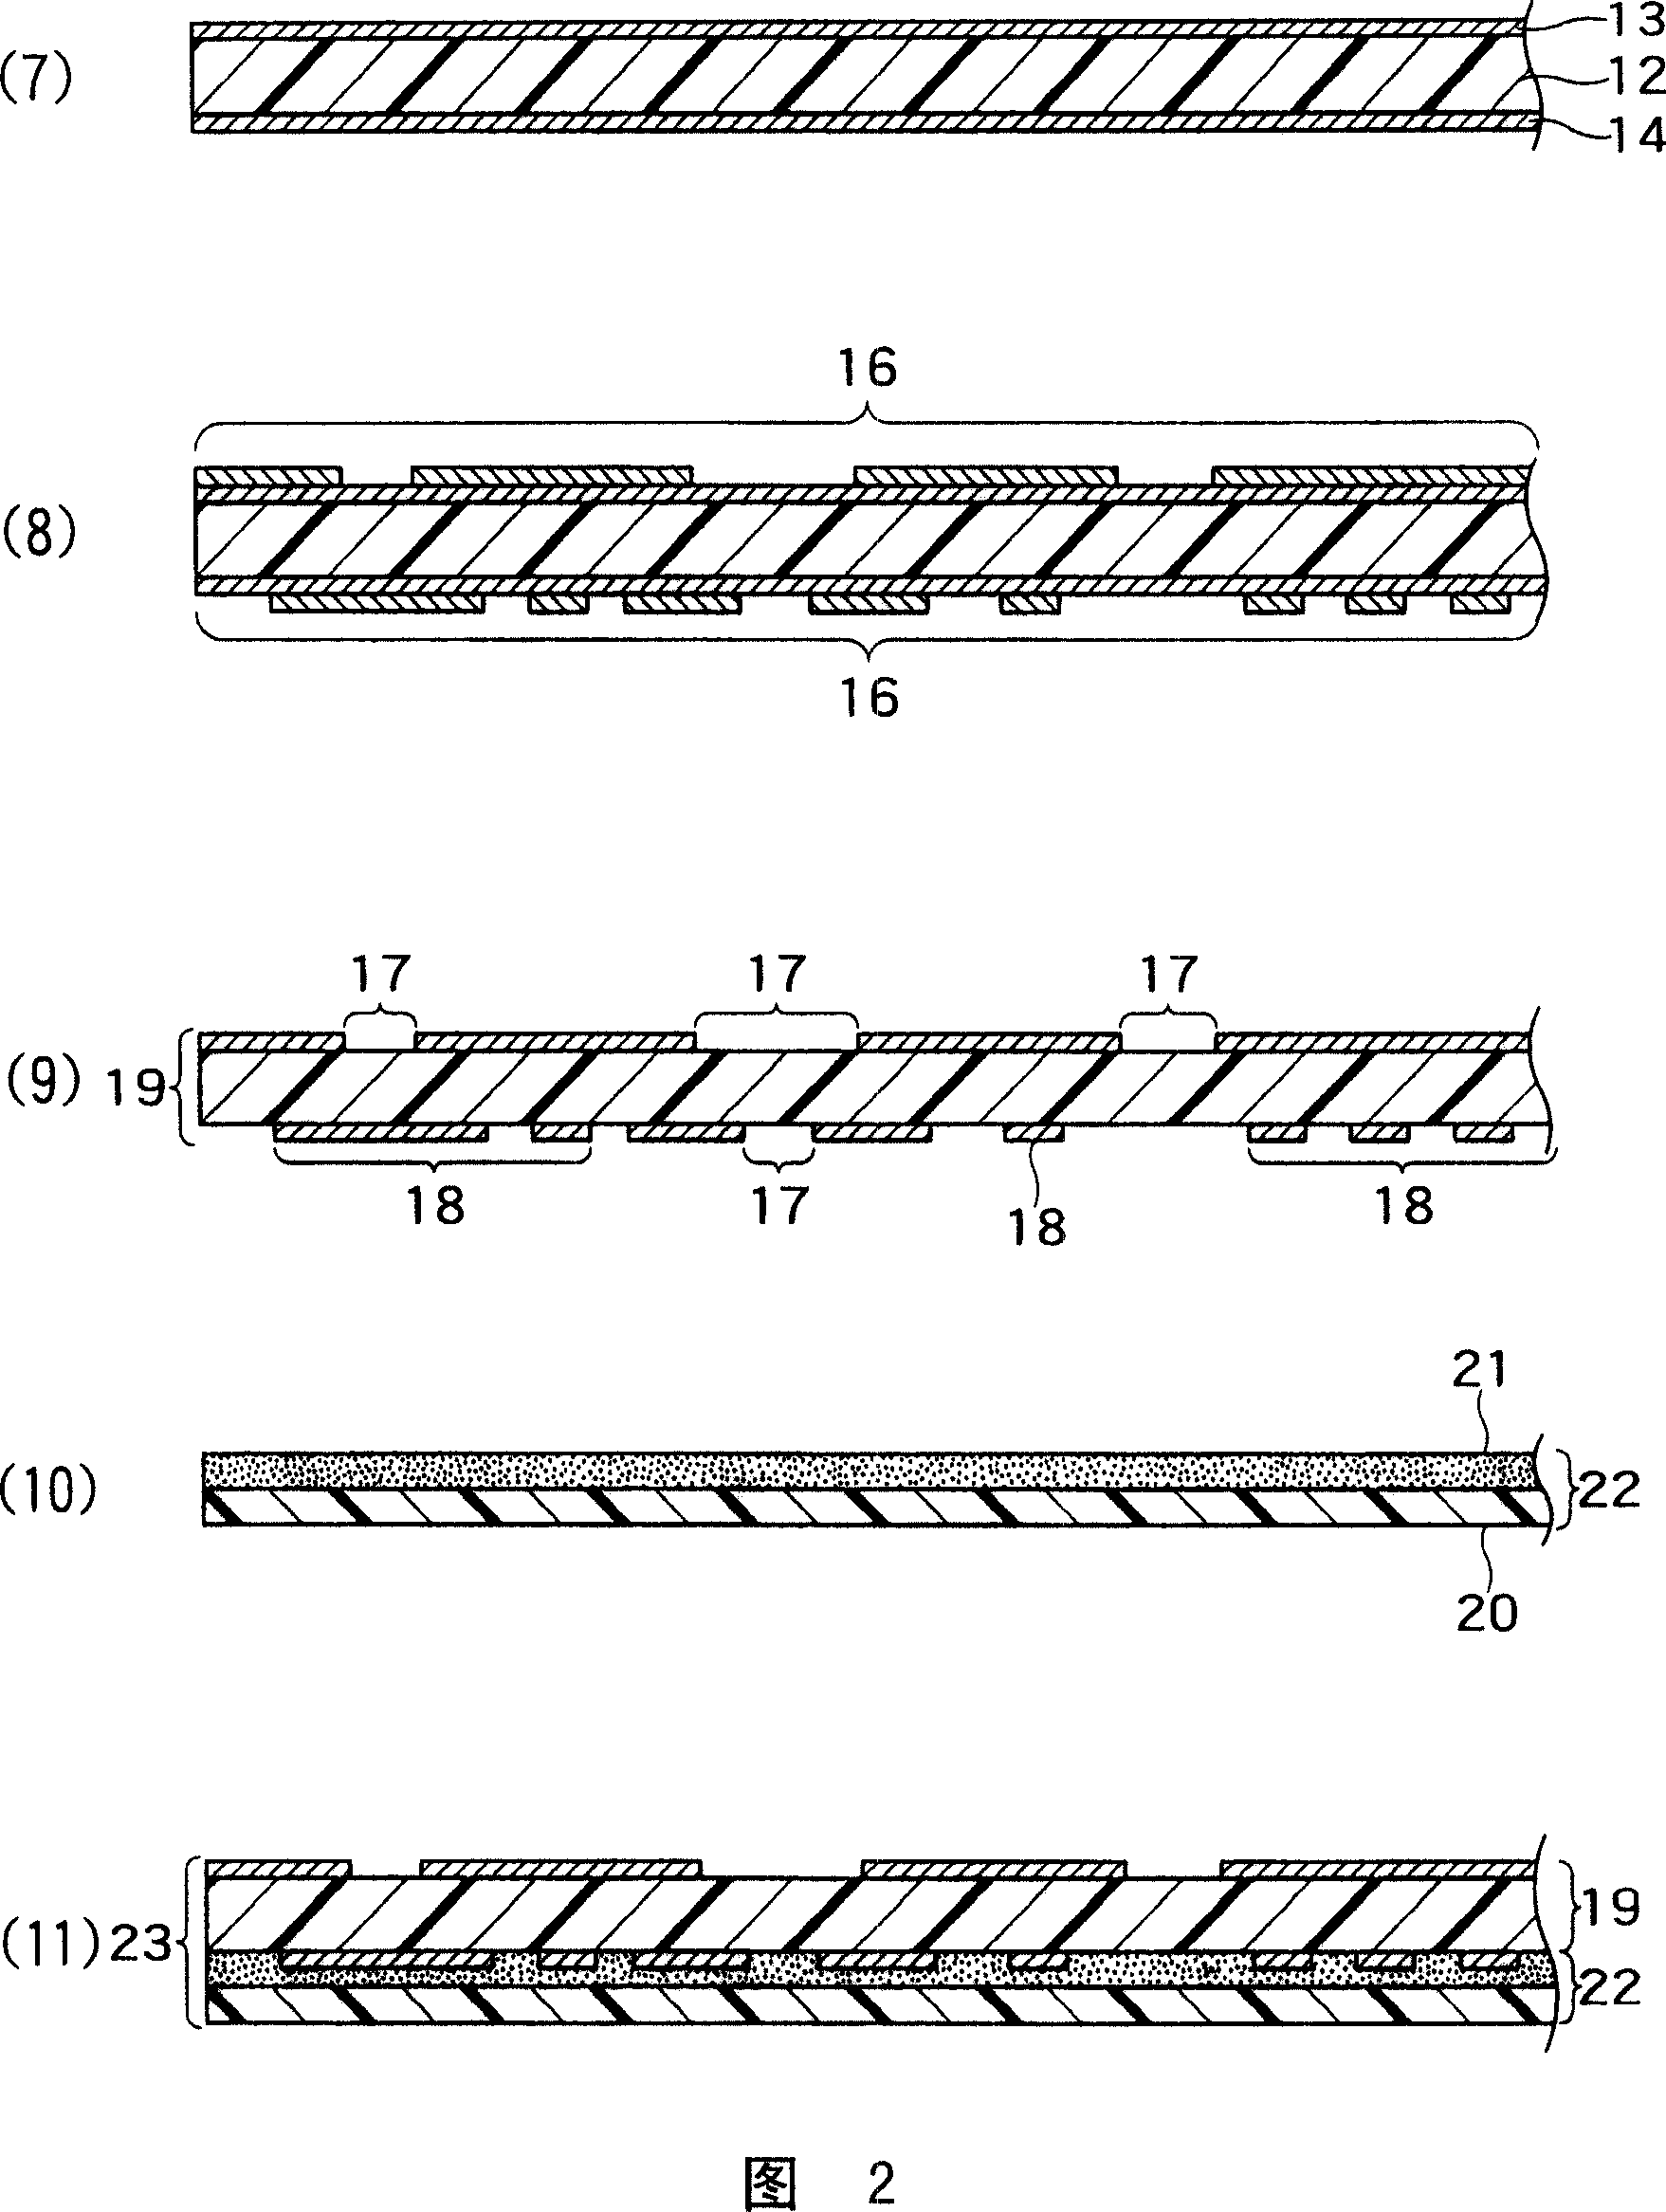 Method for manufacturing multilayer wiring substrate with cable